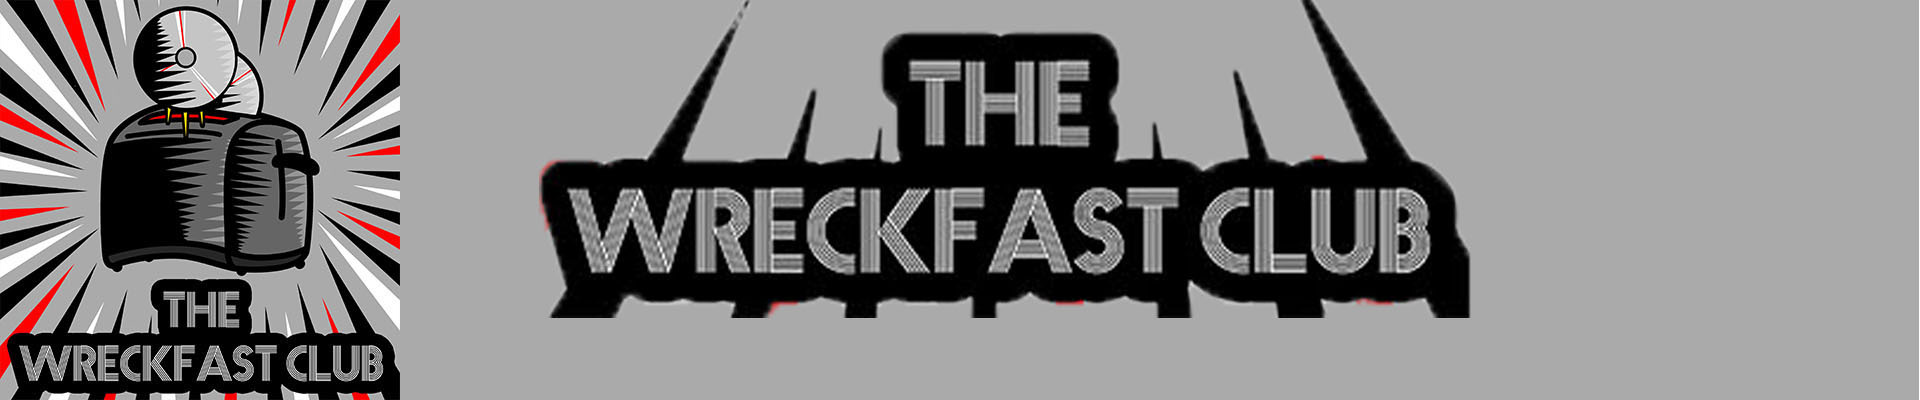 The Wreckfast club Podcast